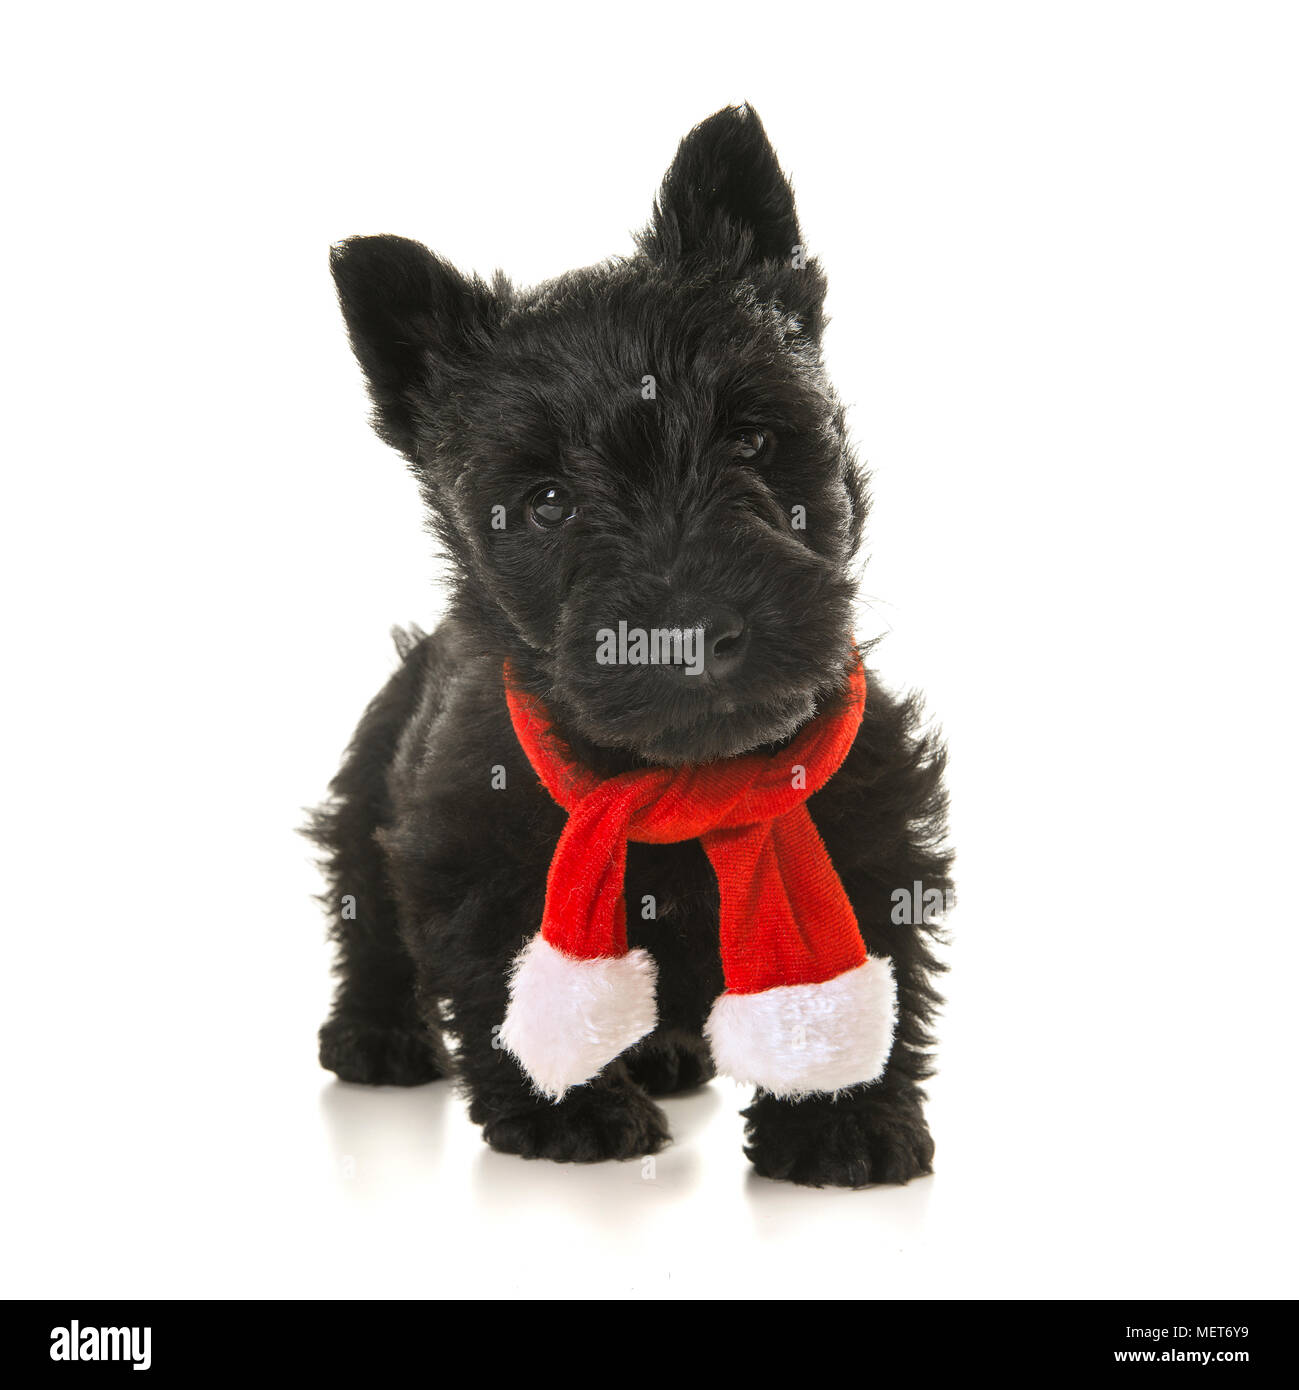 Cute black scottish terrier puppy walking towards the camera wearing a red and white christmas scarf on a white background Stock Photo